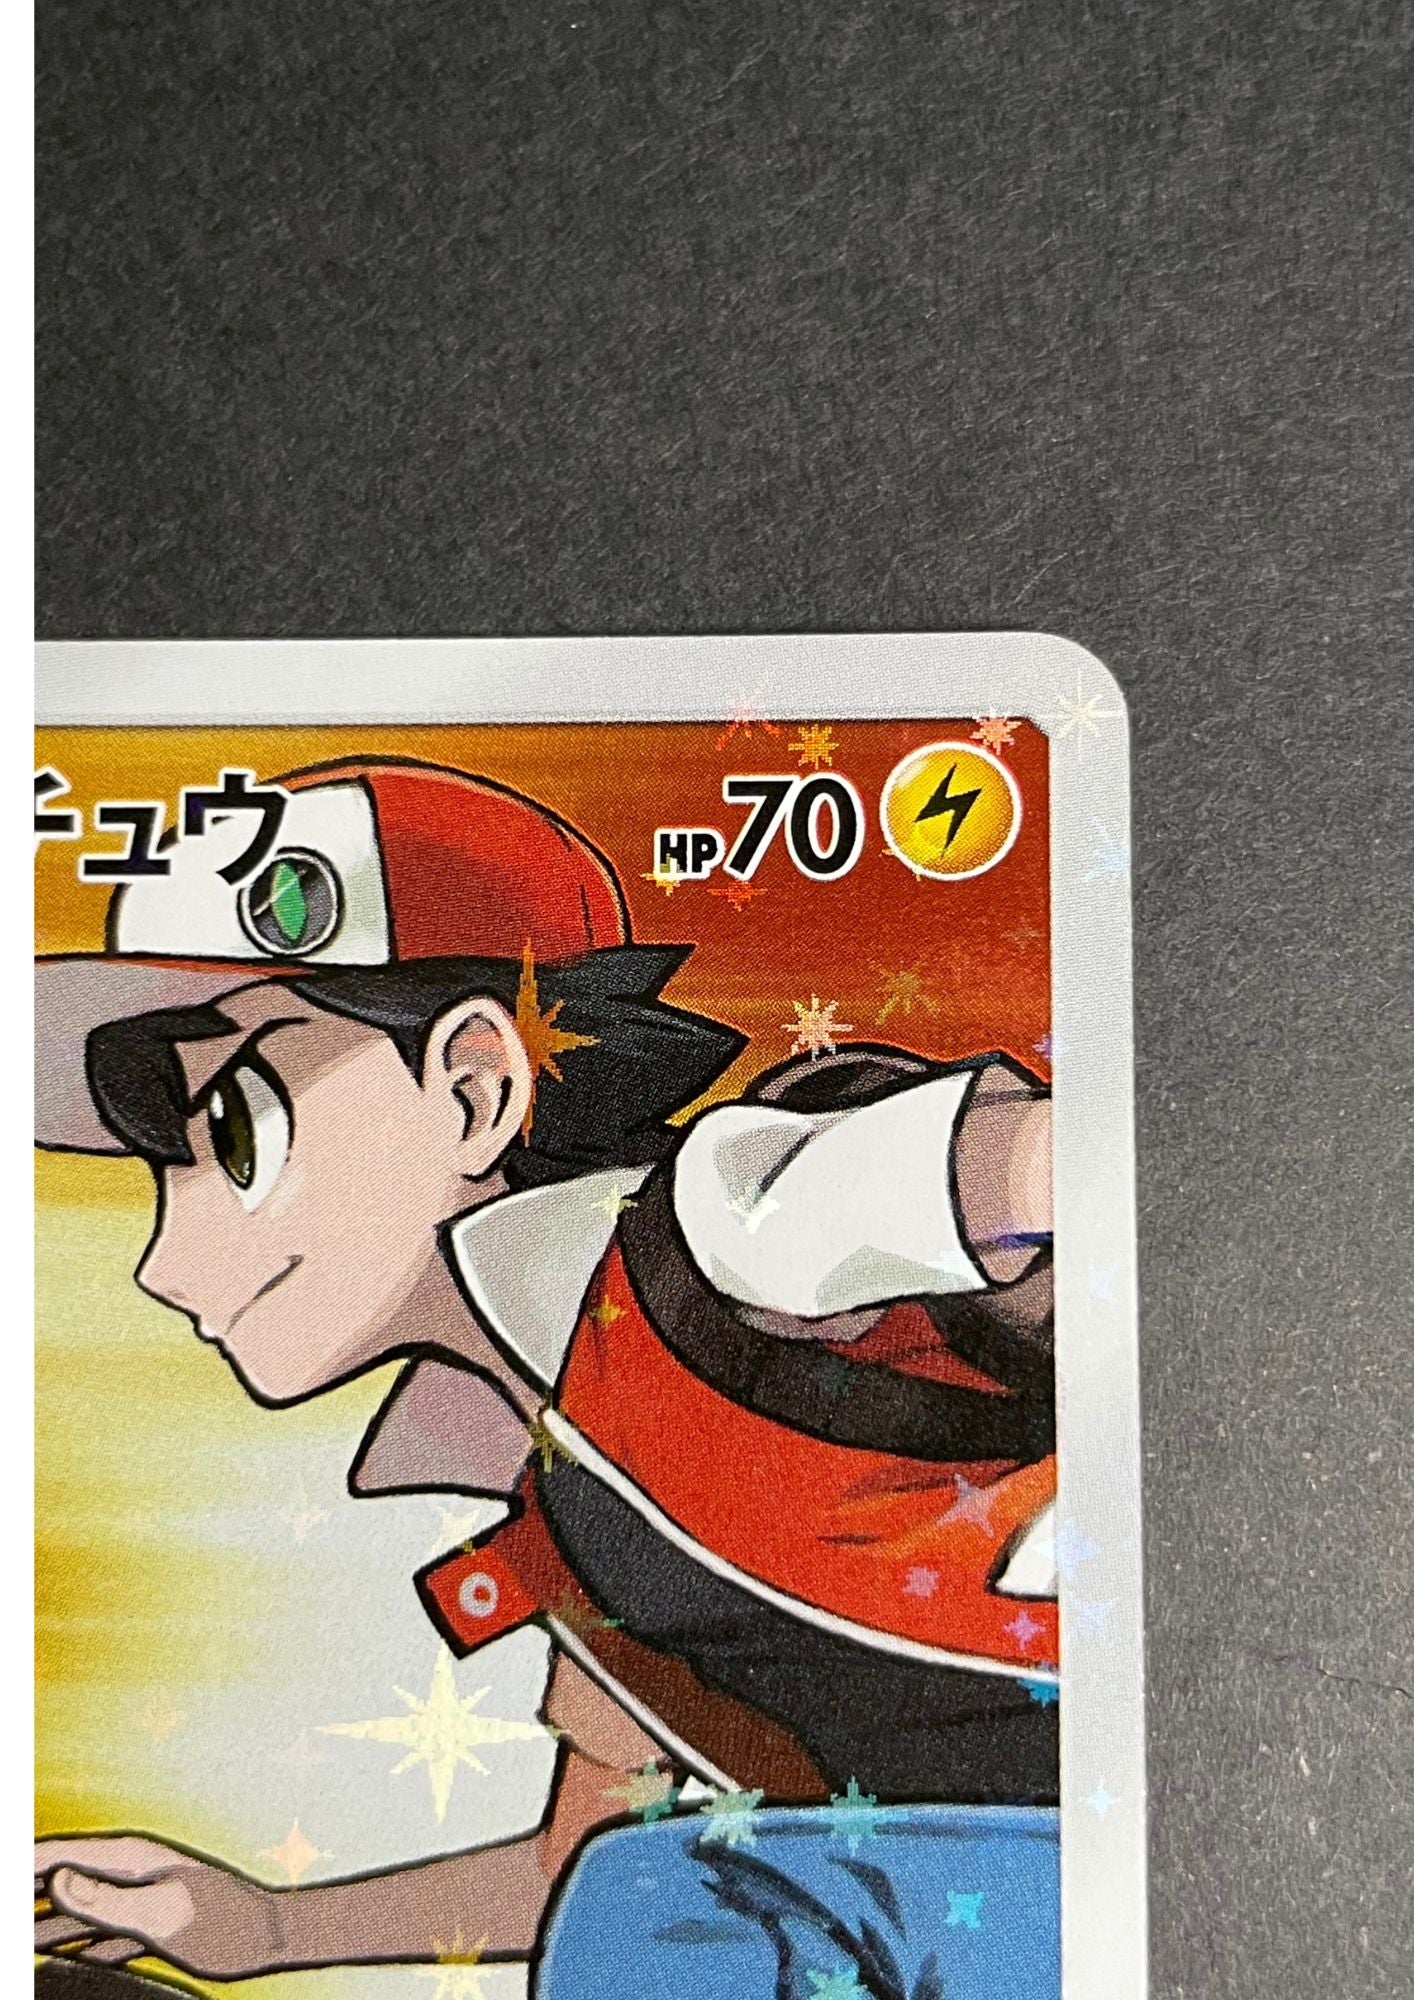 Pokemon card game [Sun & Moon] [Promotional] Red's Pikachu [270/SM 